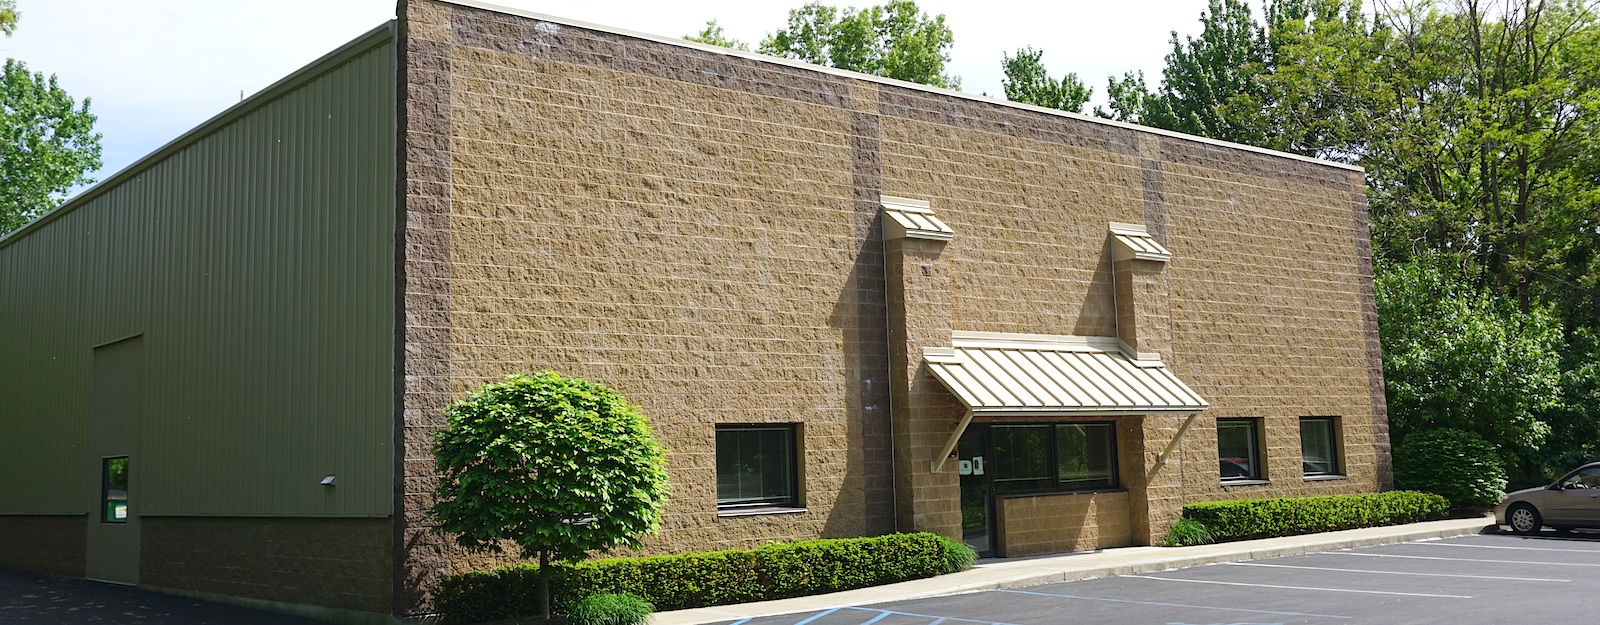 20 Walker Way, Colonie NY - Commercial Warehouse